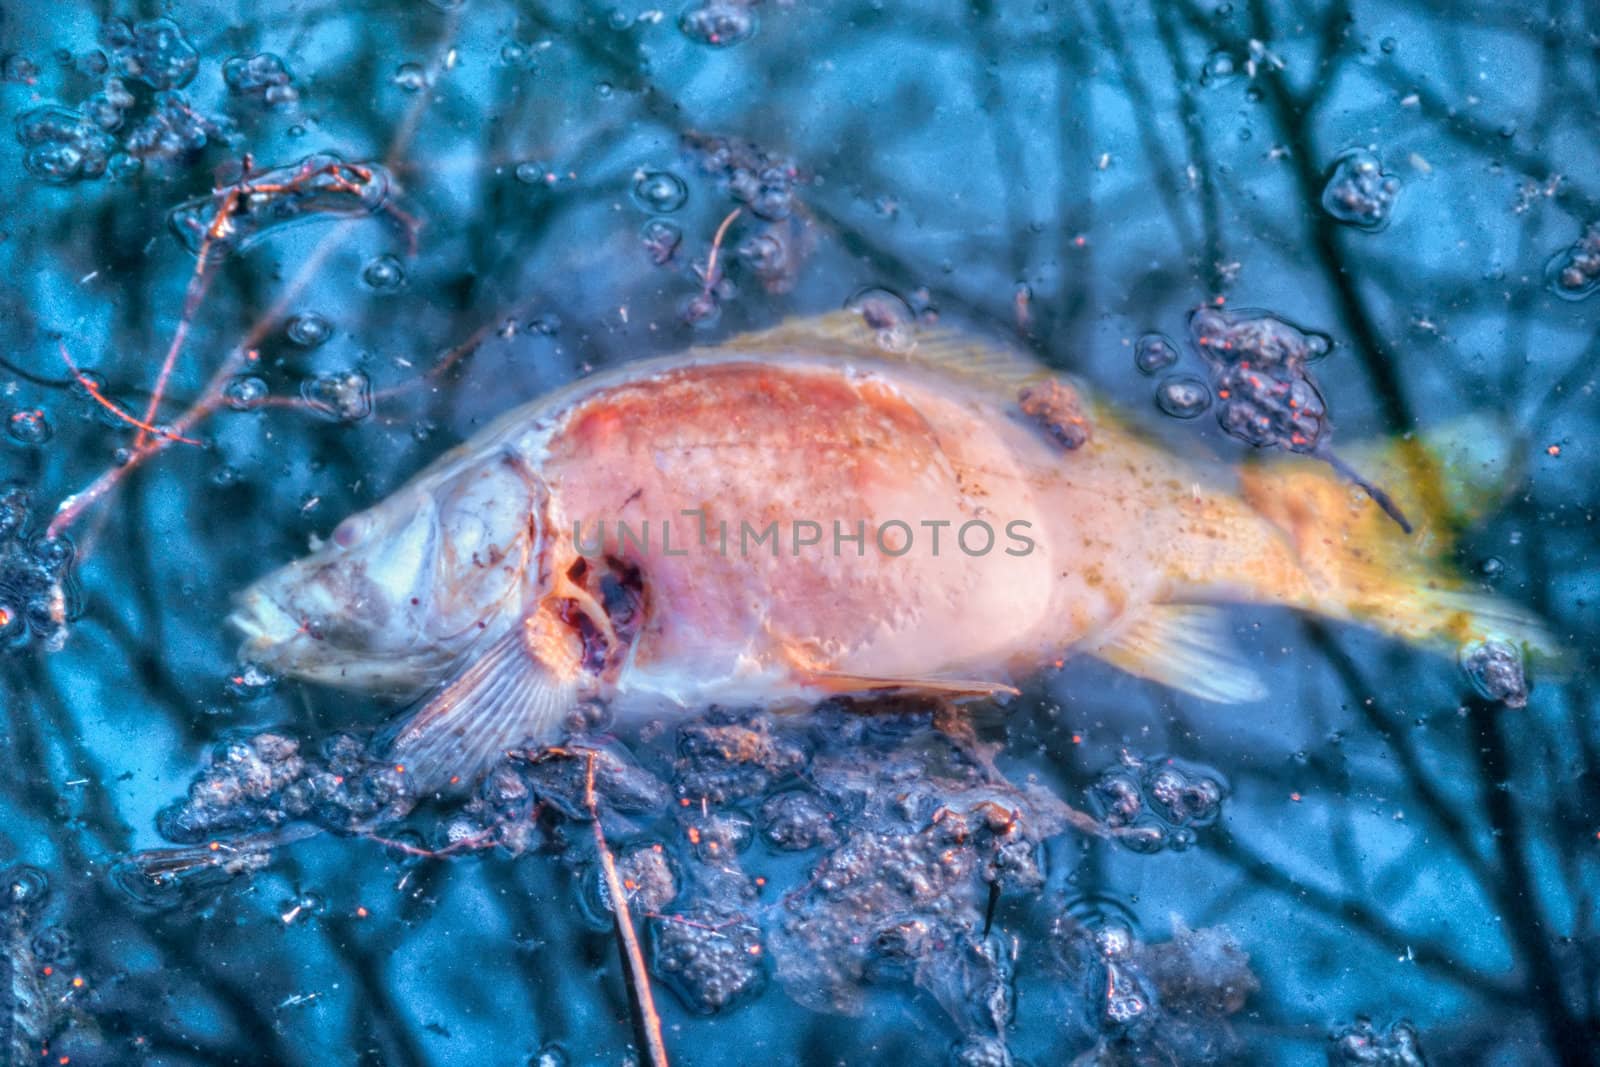 Decaying dead carp (Cyprinus carpio) floating in polluted water on surface.